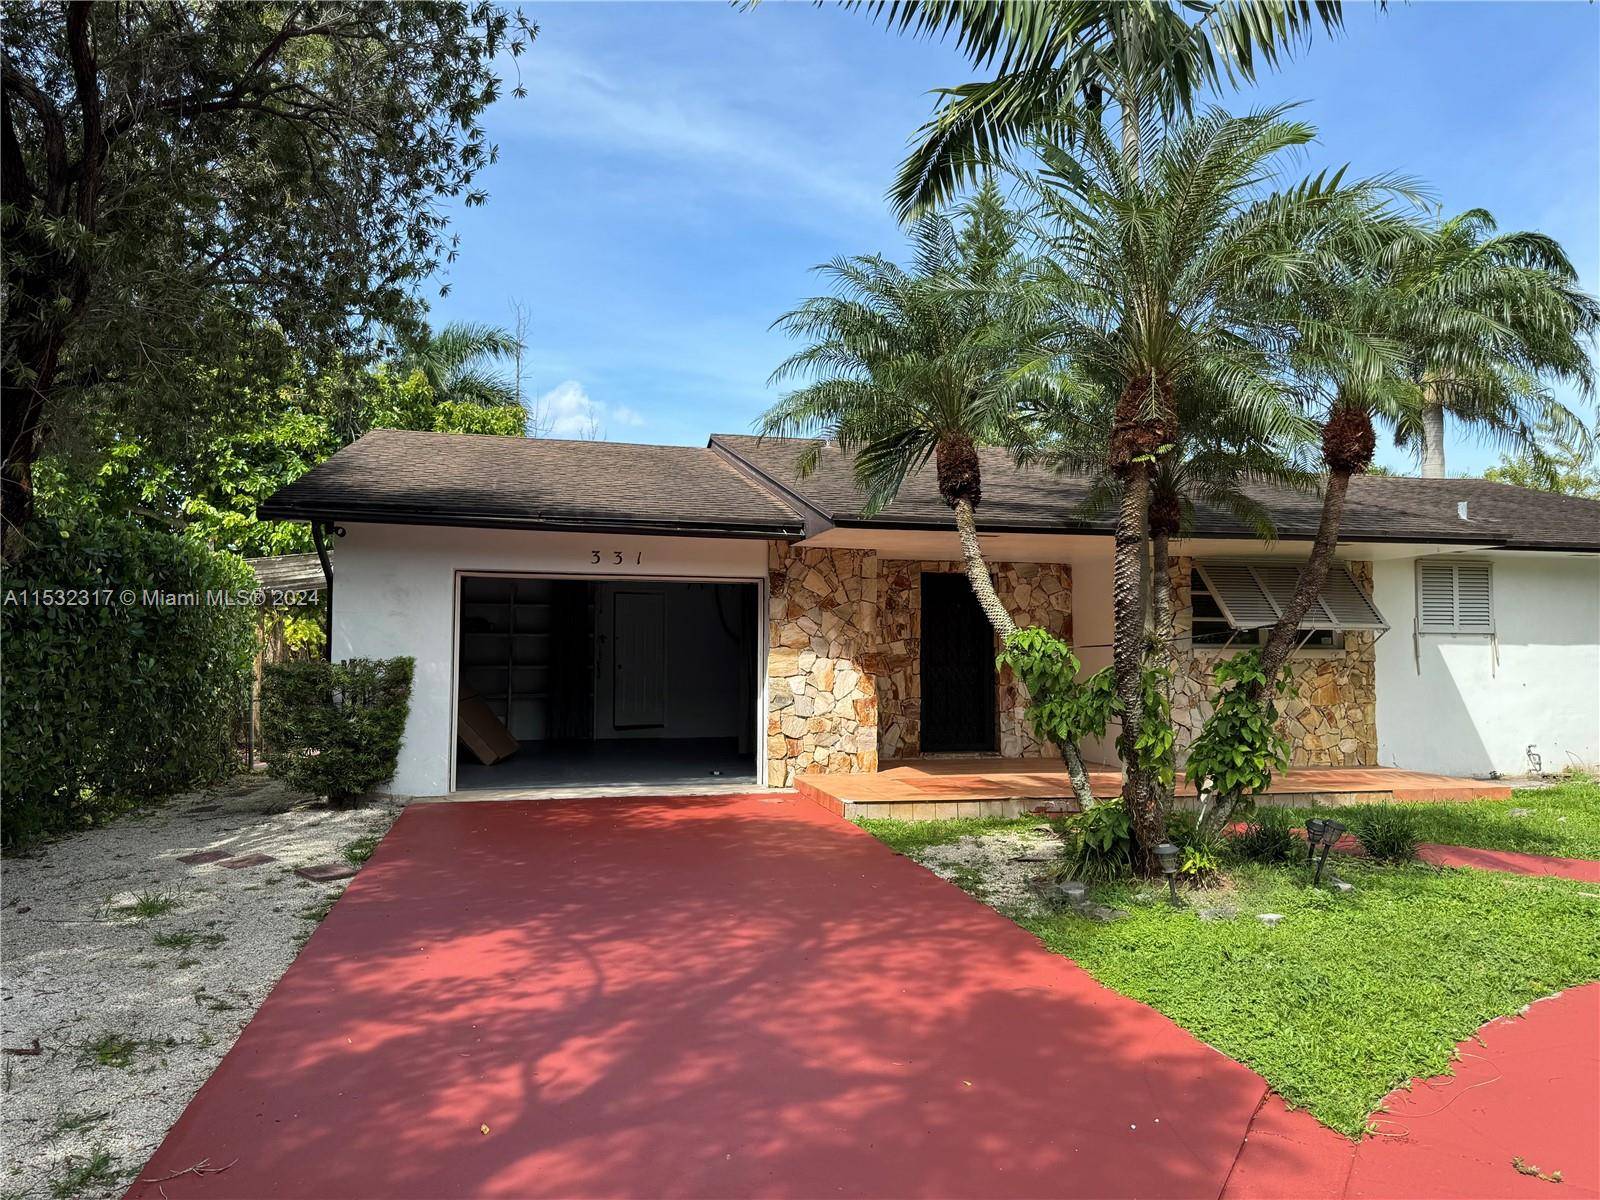 Single family pool home in Biscayne Gardens.